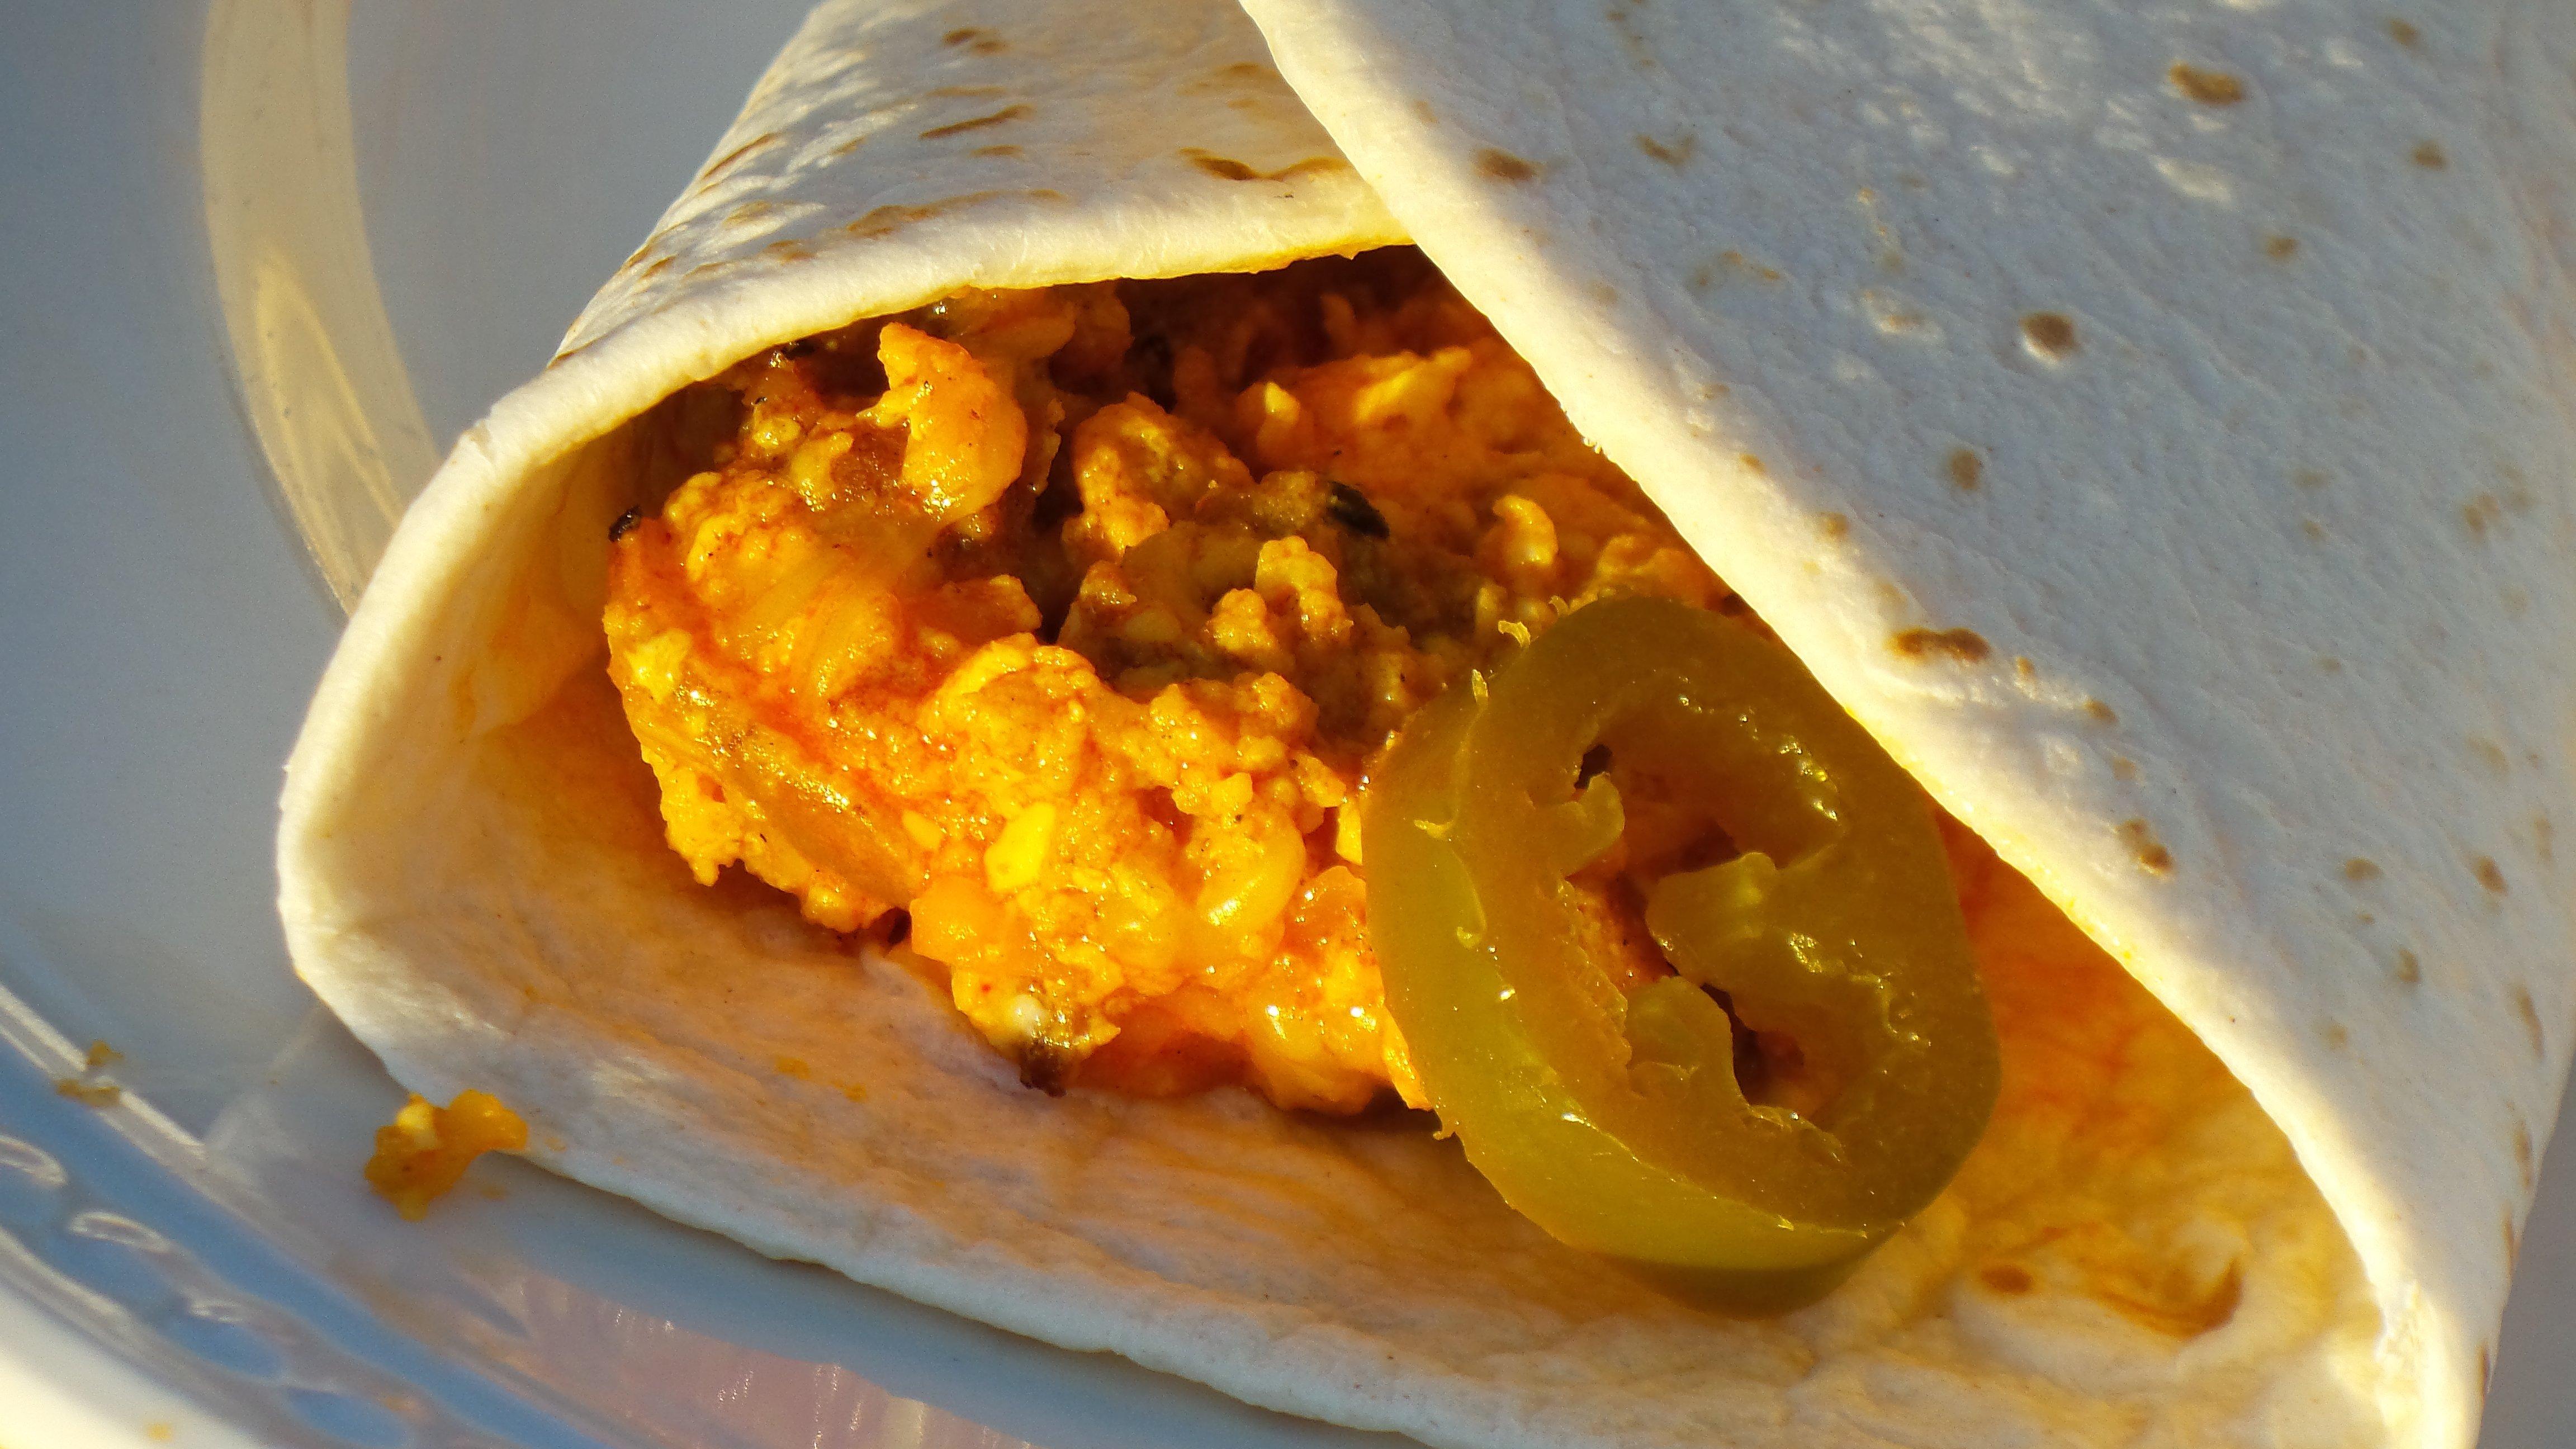 Chorizo sausage and scrambled eggs, wrapped in a warm tortilla, is a deer camp breakfast that will stick with you all day.